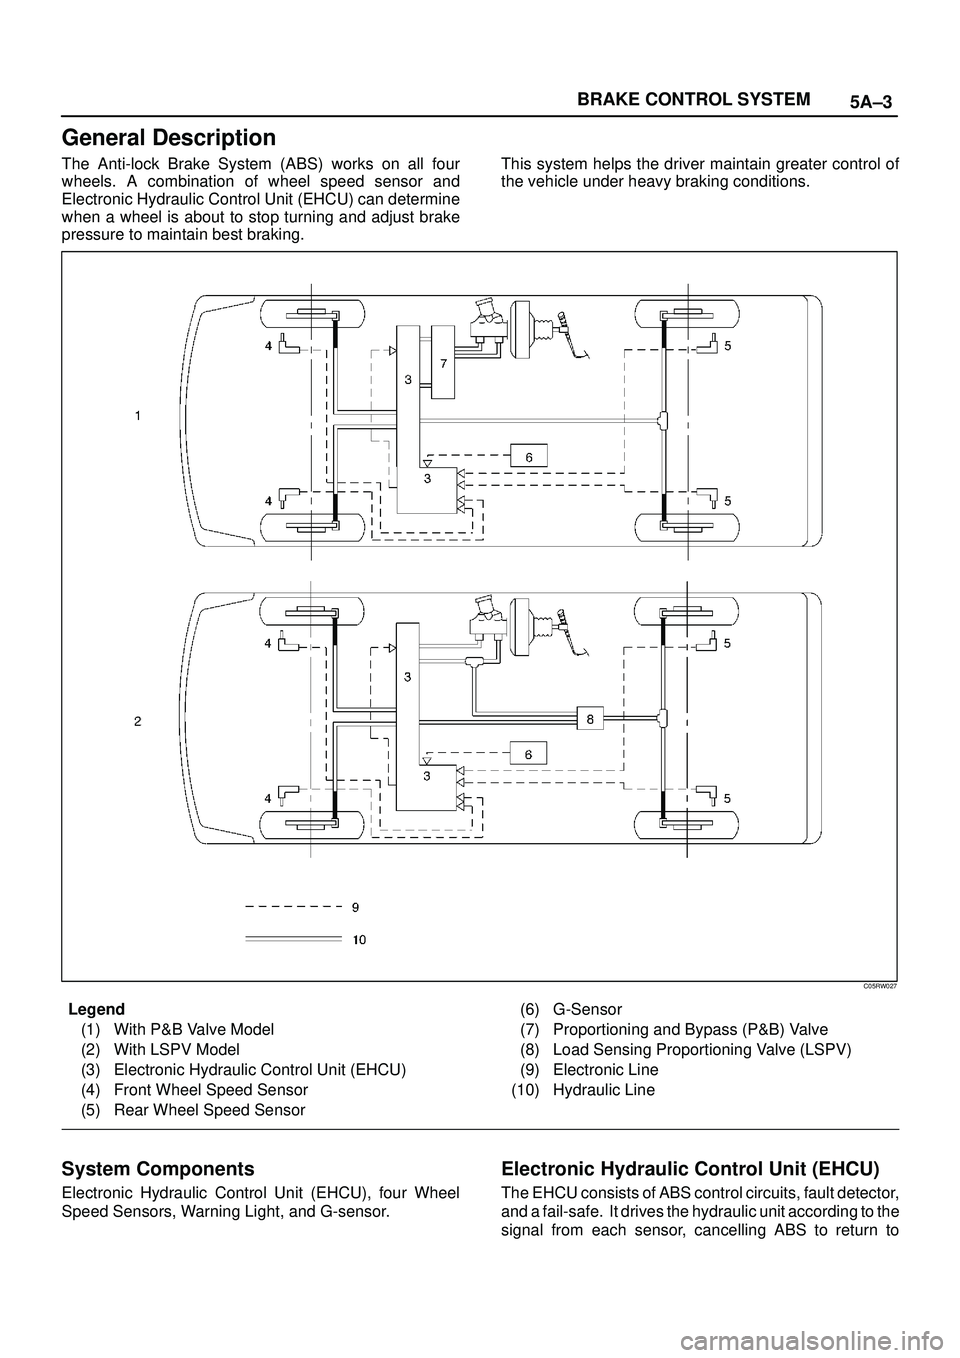 ISUZU TROOPER 1998  Service Repair Manual 5A±3 BRAKE CONTROL SYSTEM
General Description
The Anti-lock Brake System (ABS) works on all four
wheels. A combination of wheel speed sensor and
Electronic Hydraulic Control Unit (EHCU) can determine